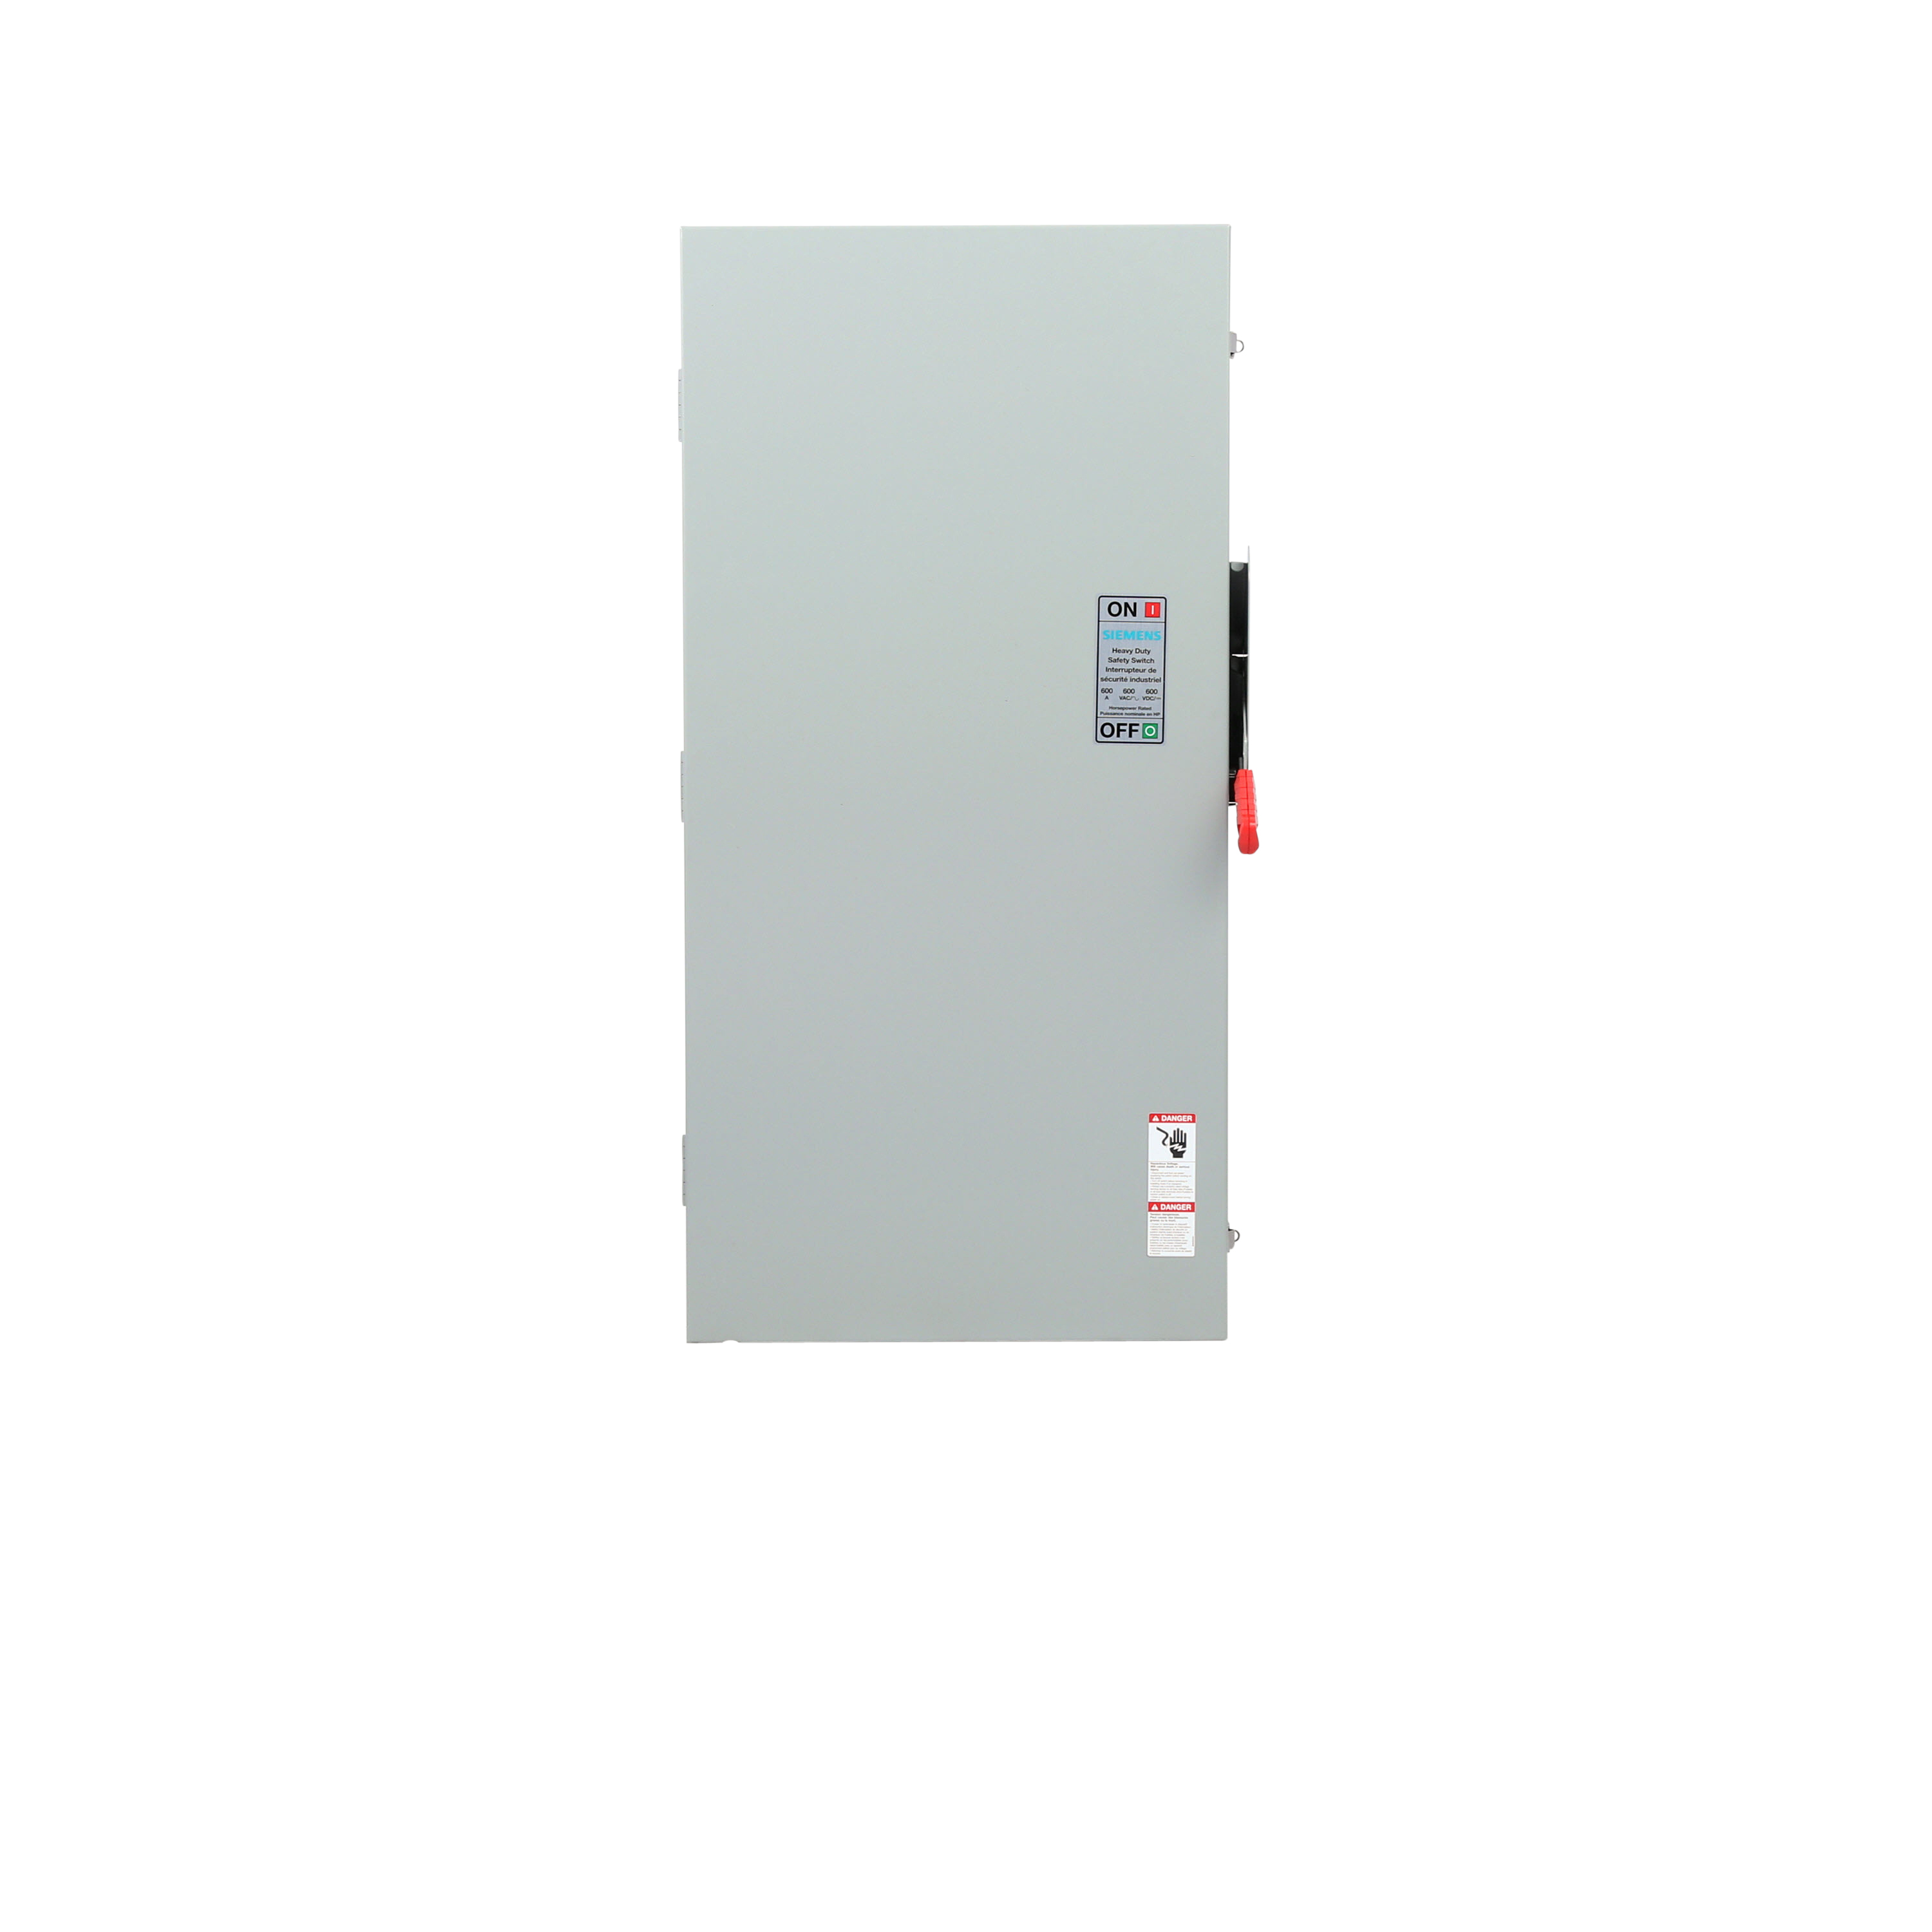 Siemens Low Voltage Circuit Protection Heavy Duty Safety Switch. 3-Pole 3-Fuse and solid neutral Fused in a type 3R enclosure (outdoor). Rated 600VAC (600A).